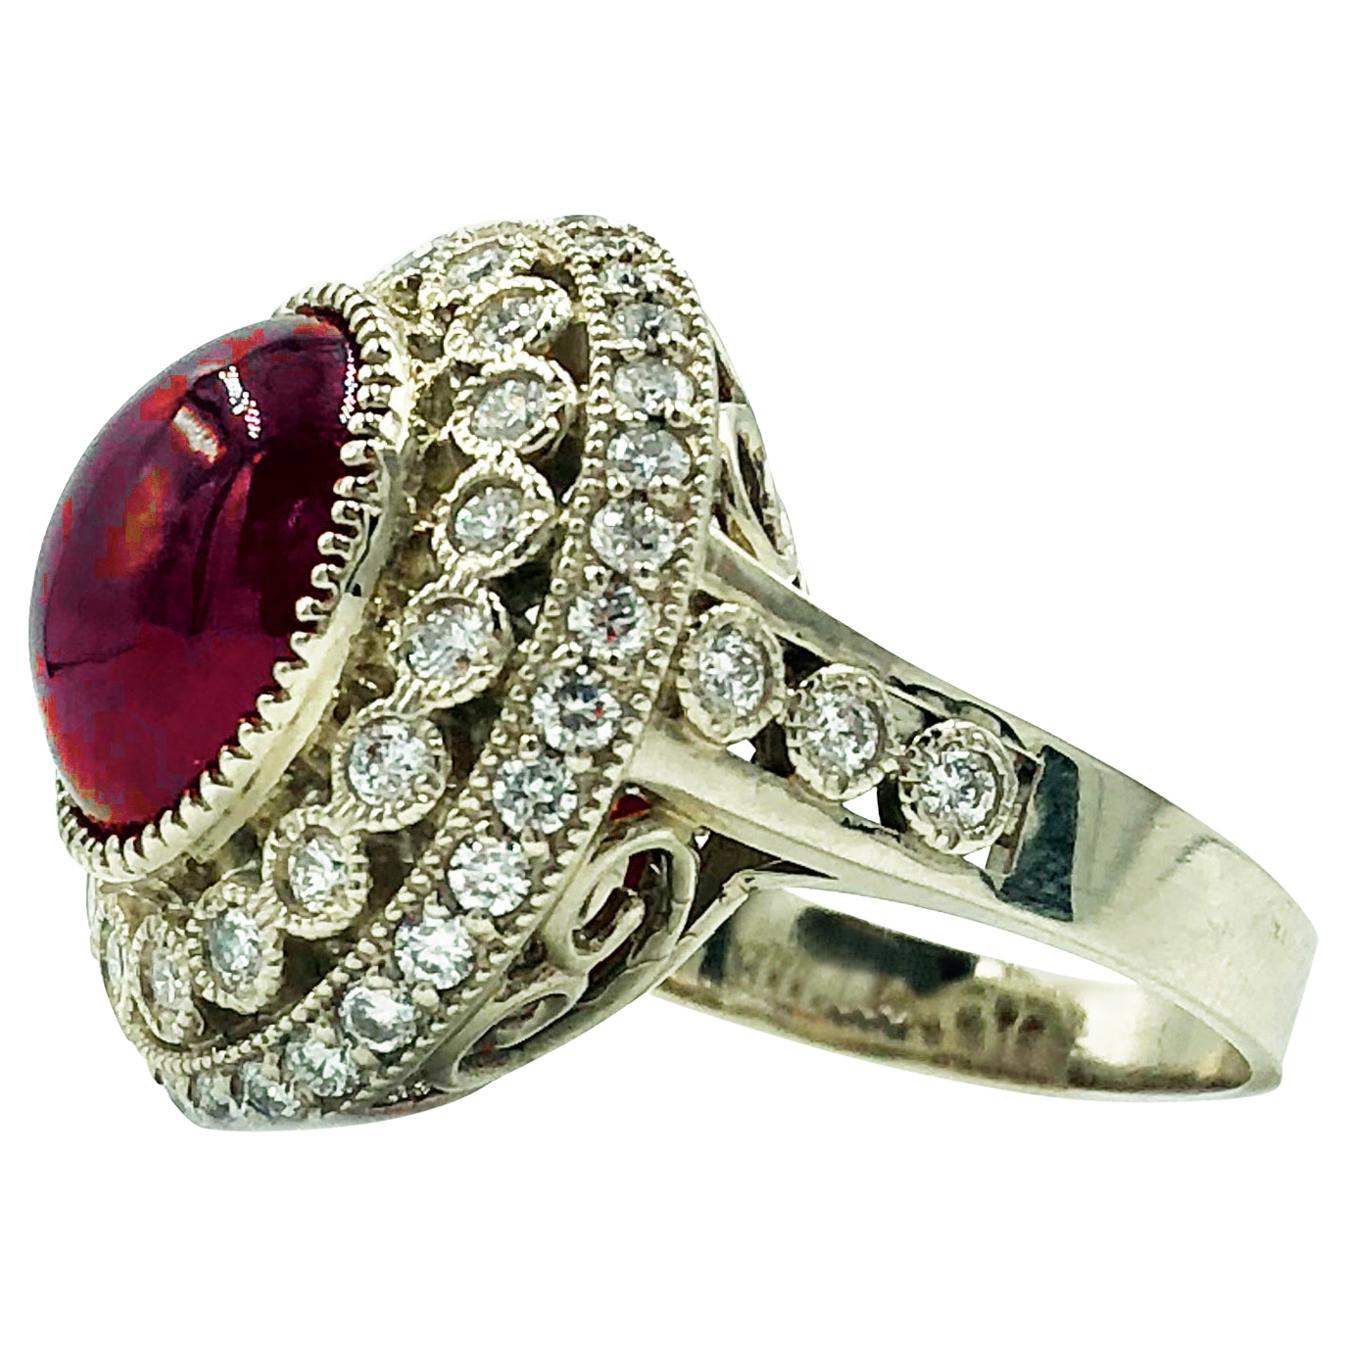 AIGL Certified 10 Carat Cabochon Ruby Ring With 1.25 Carats Of Diamonds 14K Gold